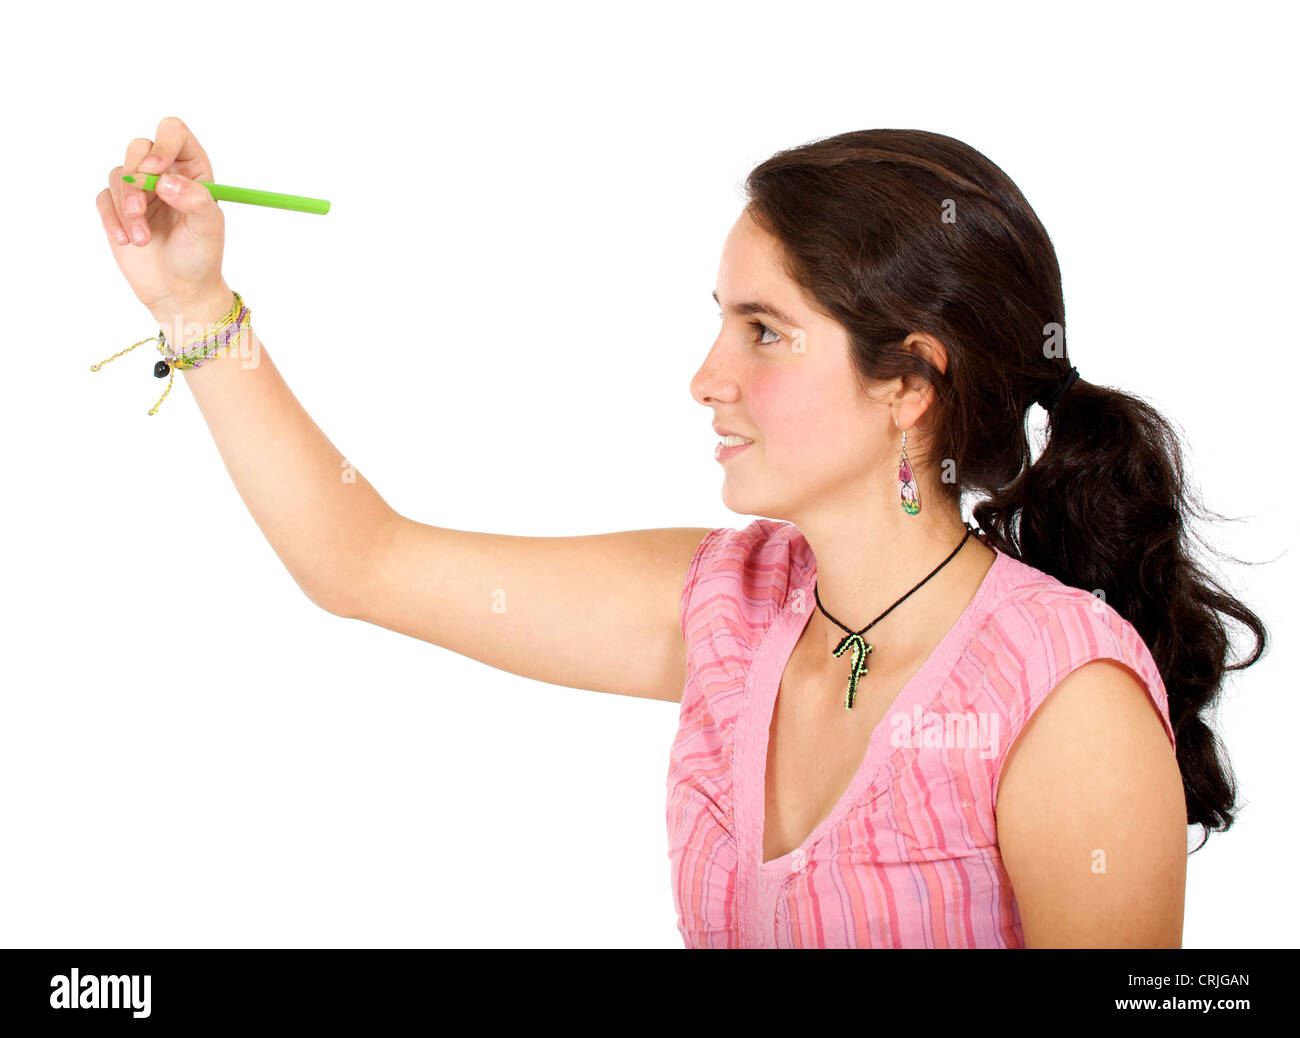 young woman drawing something on an imaginary glass pane in front of her with a bright green pencil Stock Photo